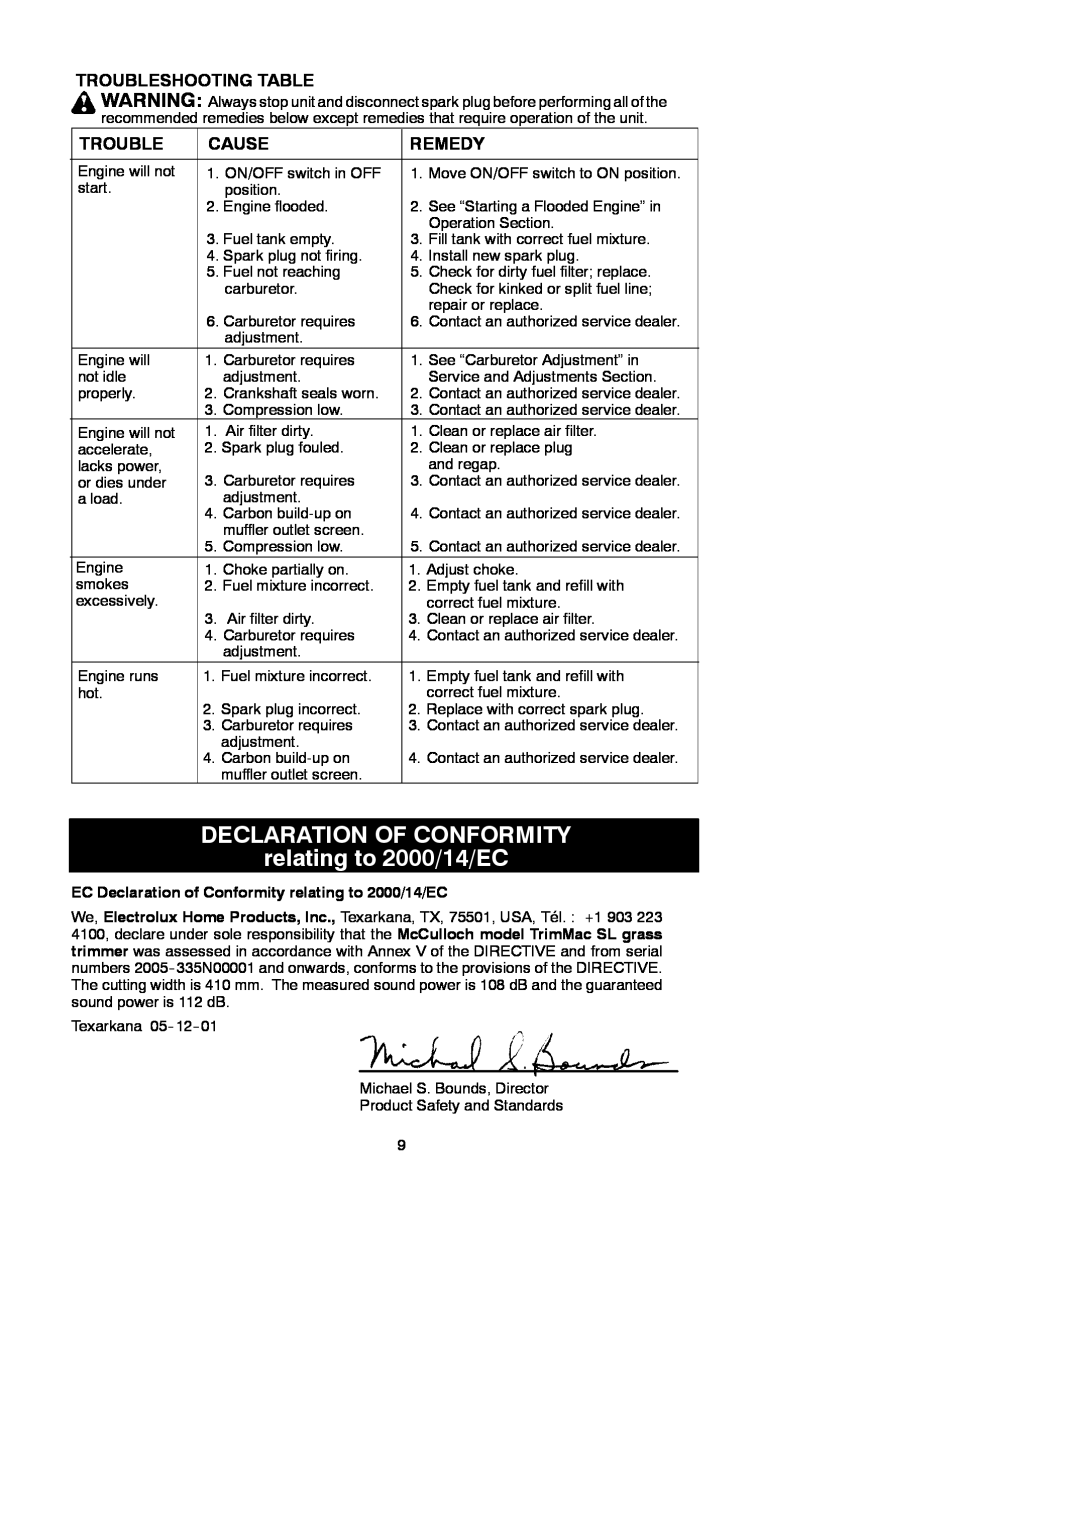 McCulloch 545097742 DECLARATION OF CONFORMITY relating to 2000/14/EC, Troubleshooting Table, Cause, Remedy 